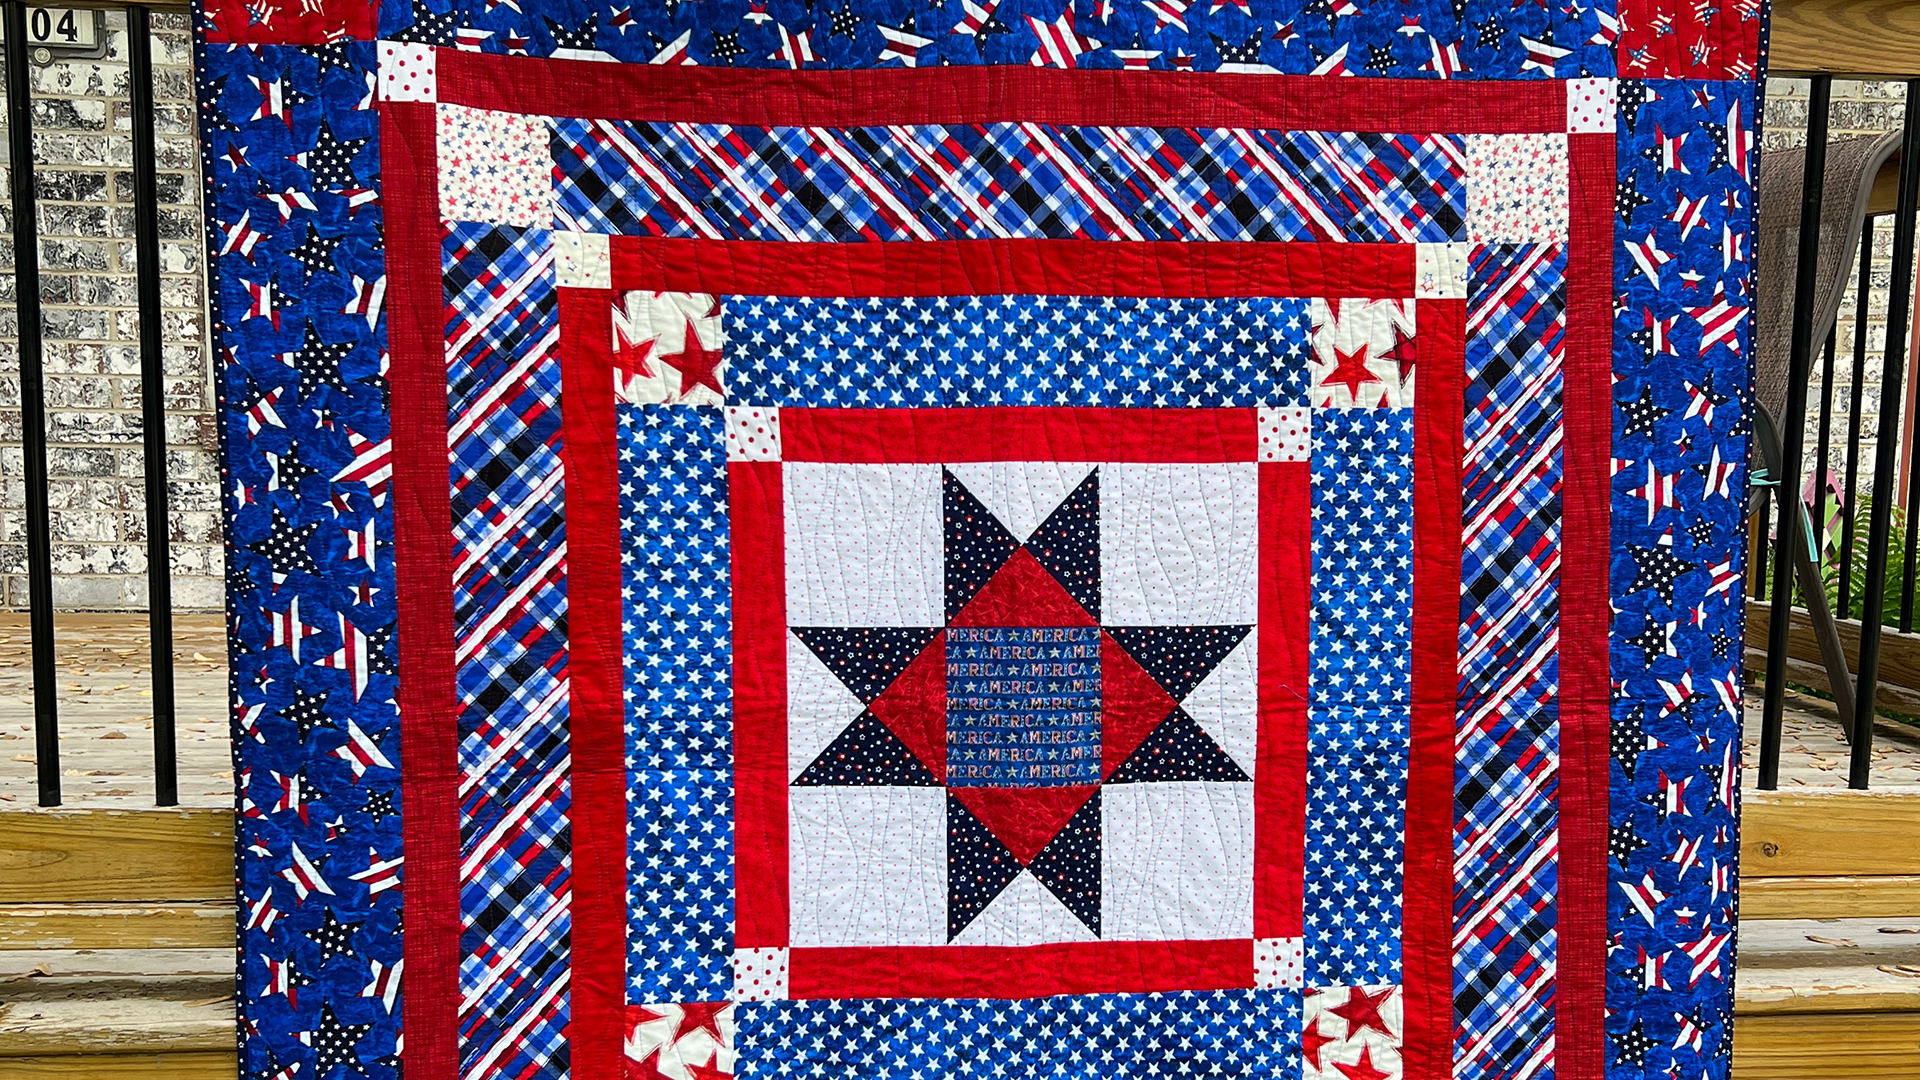 Free Quilt Pattern - Home Sweet Home Picnic Quilt